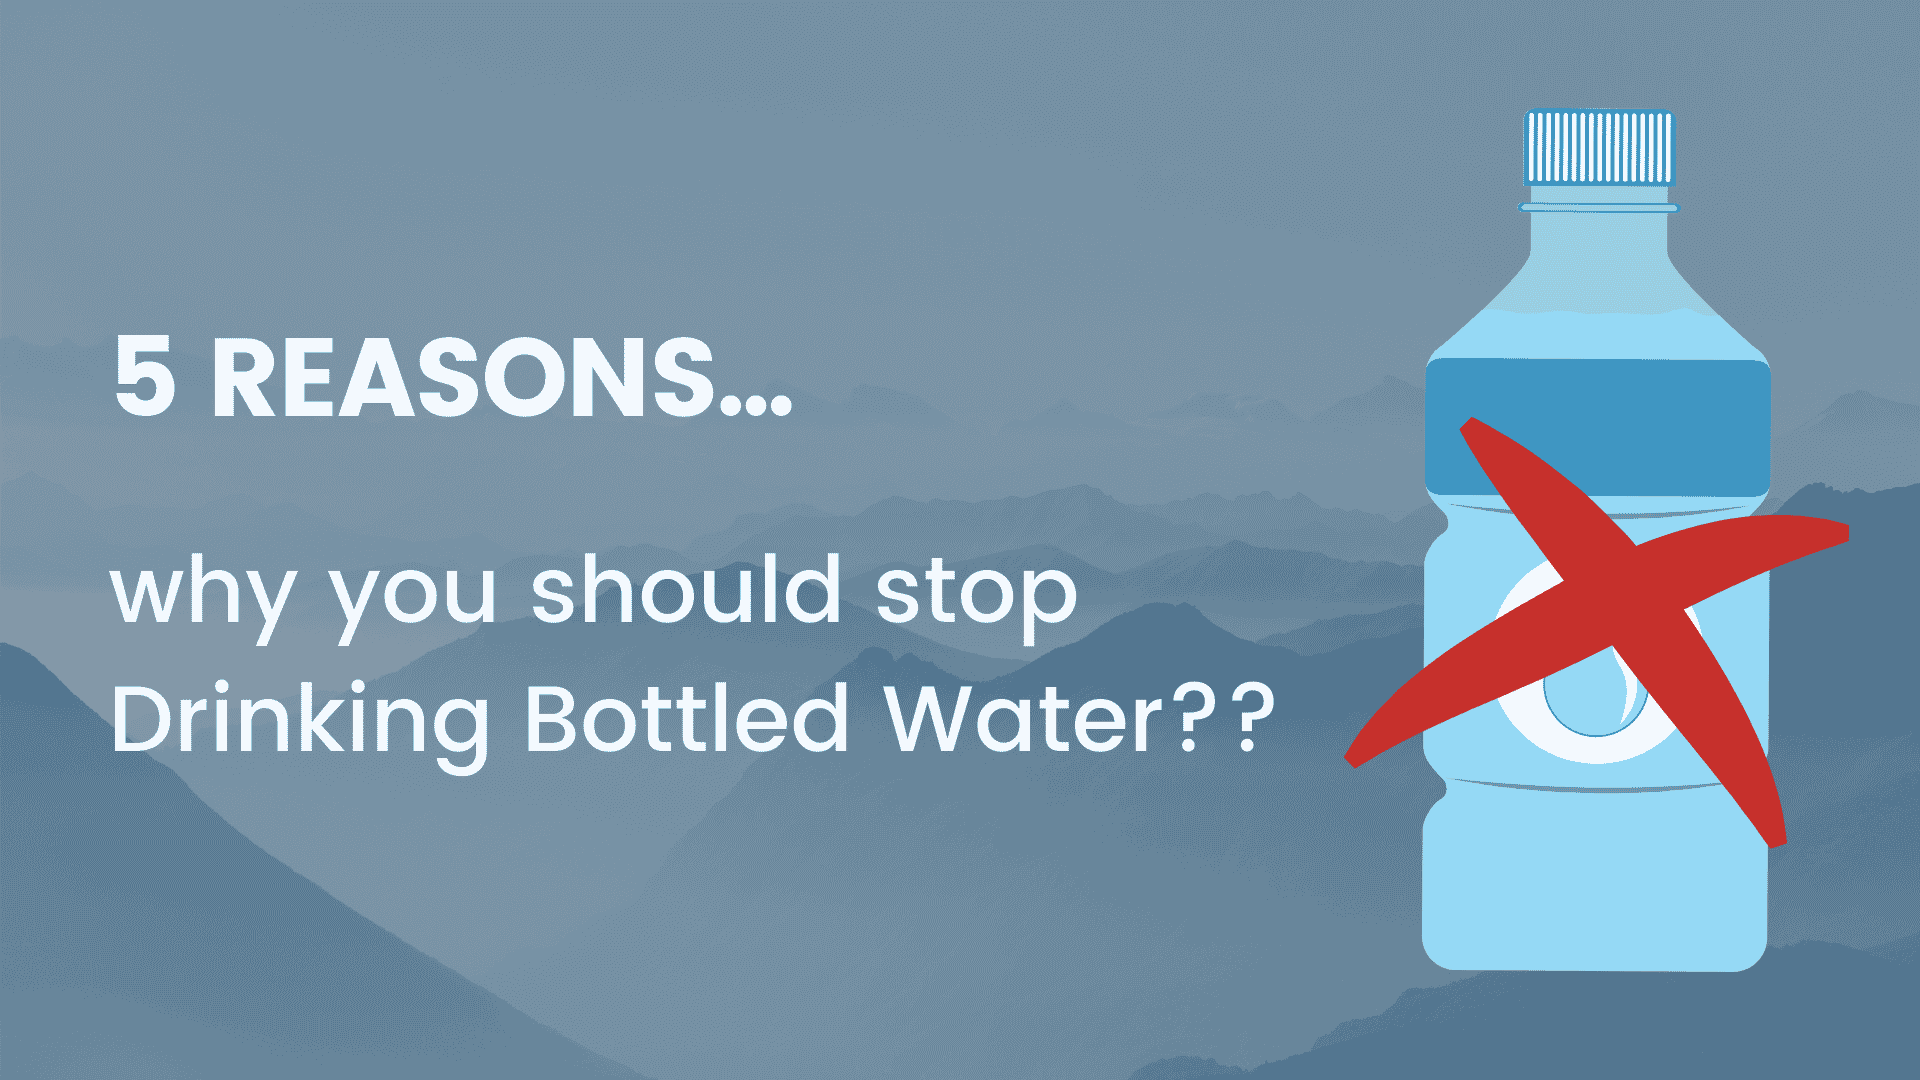 why you should stop Drinking Bottled Water